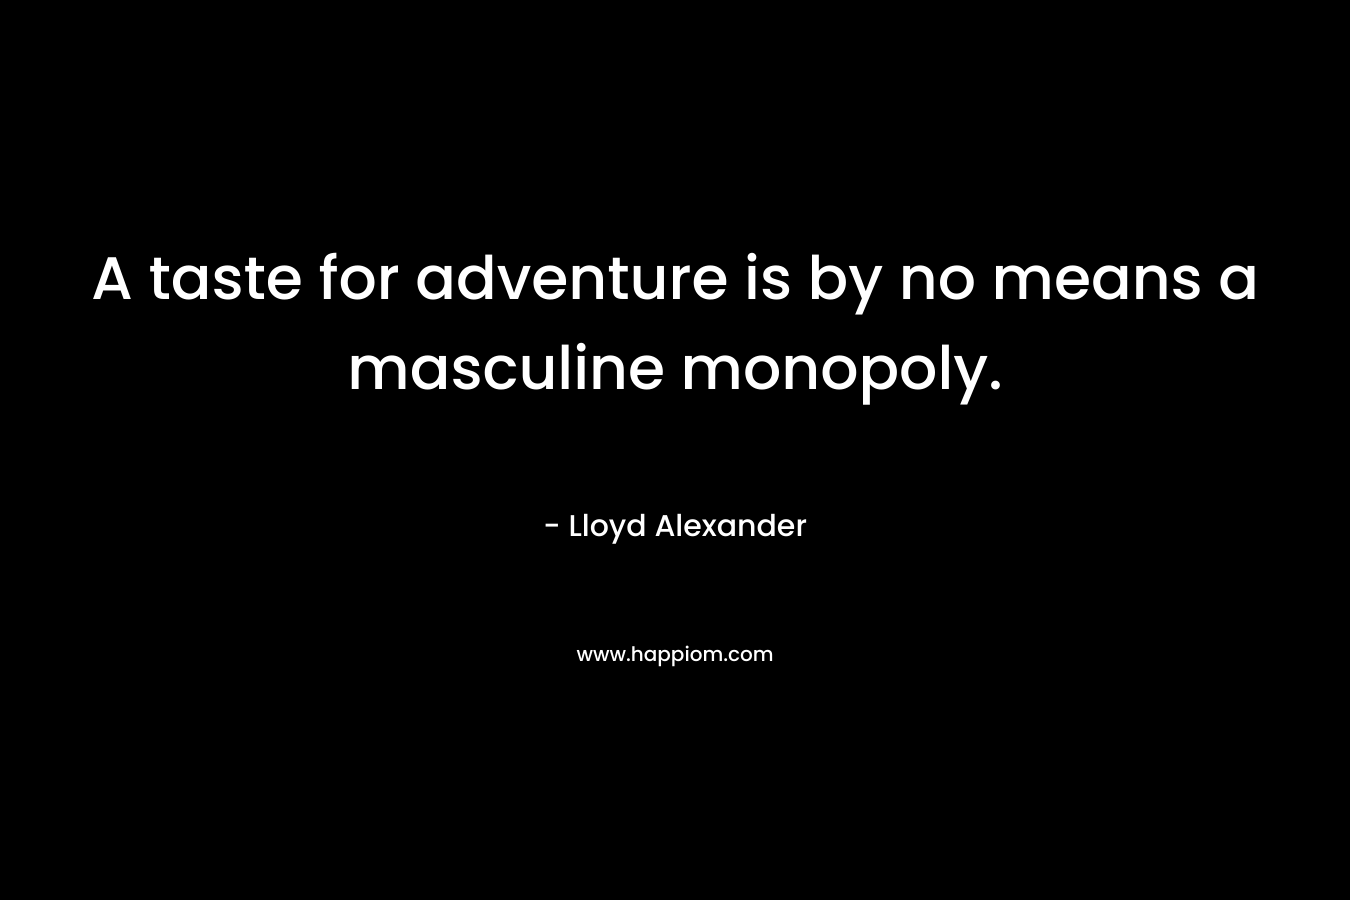 A taste for adventure is by no means a masculine monopoly. – Lloyd Alexander